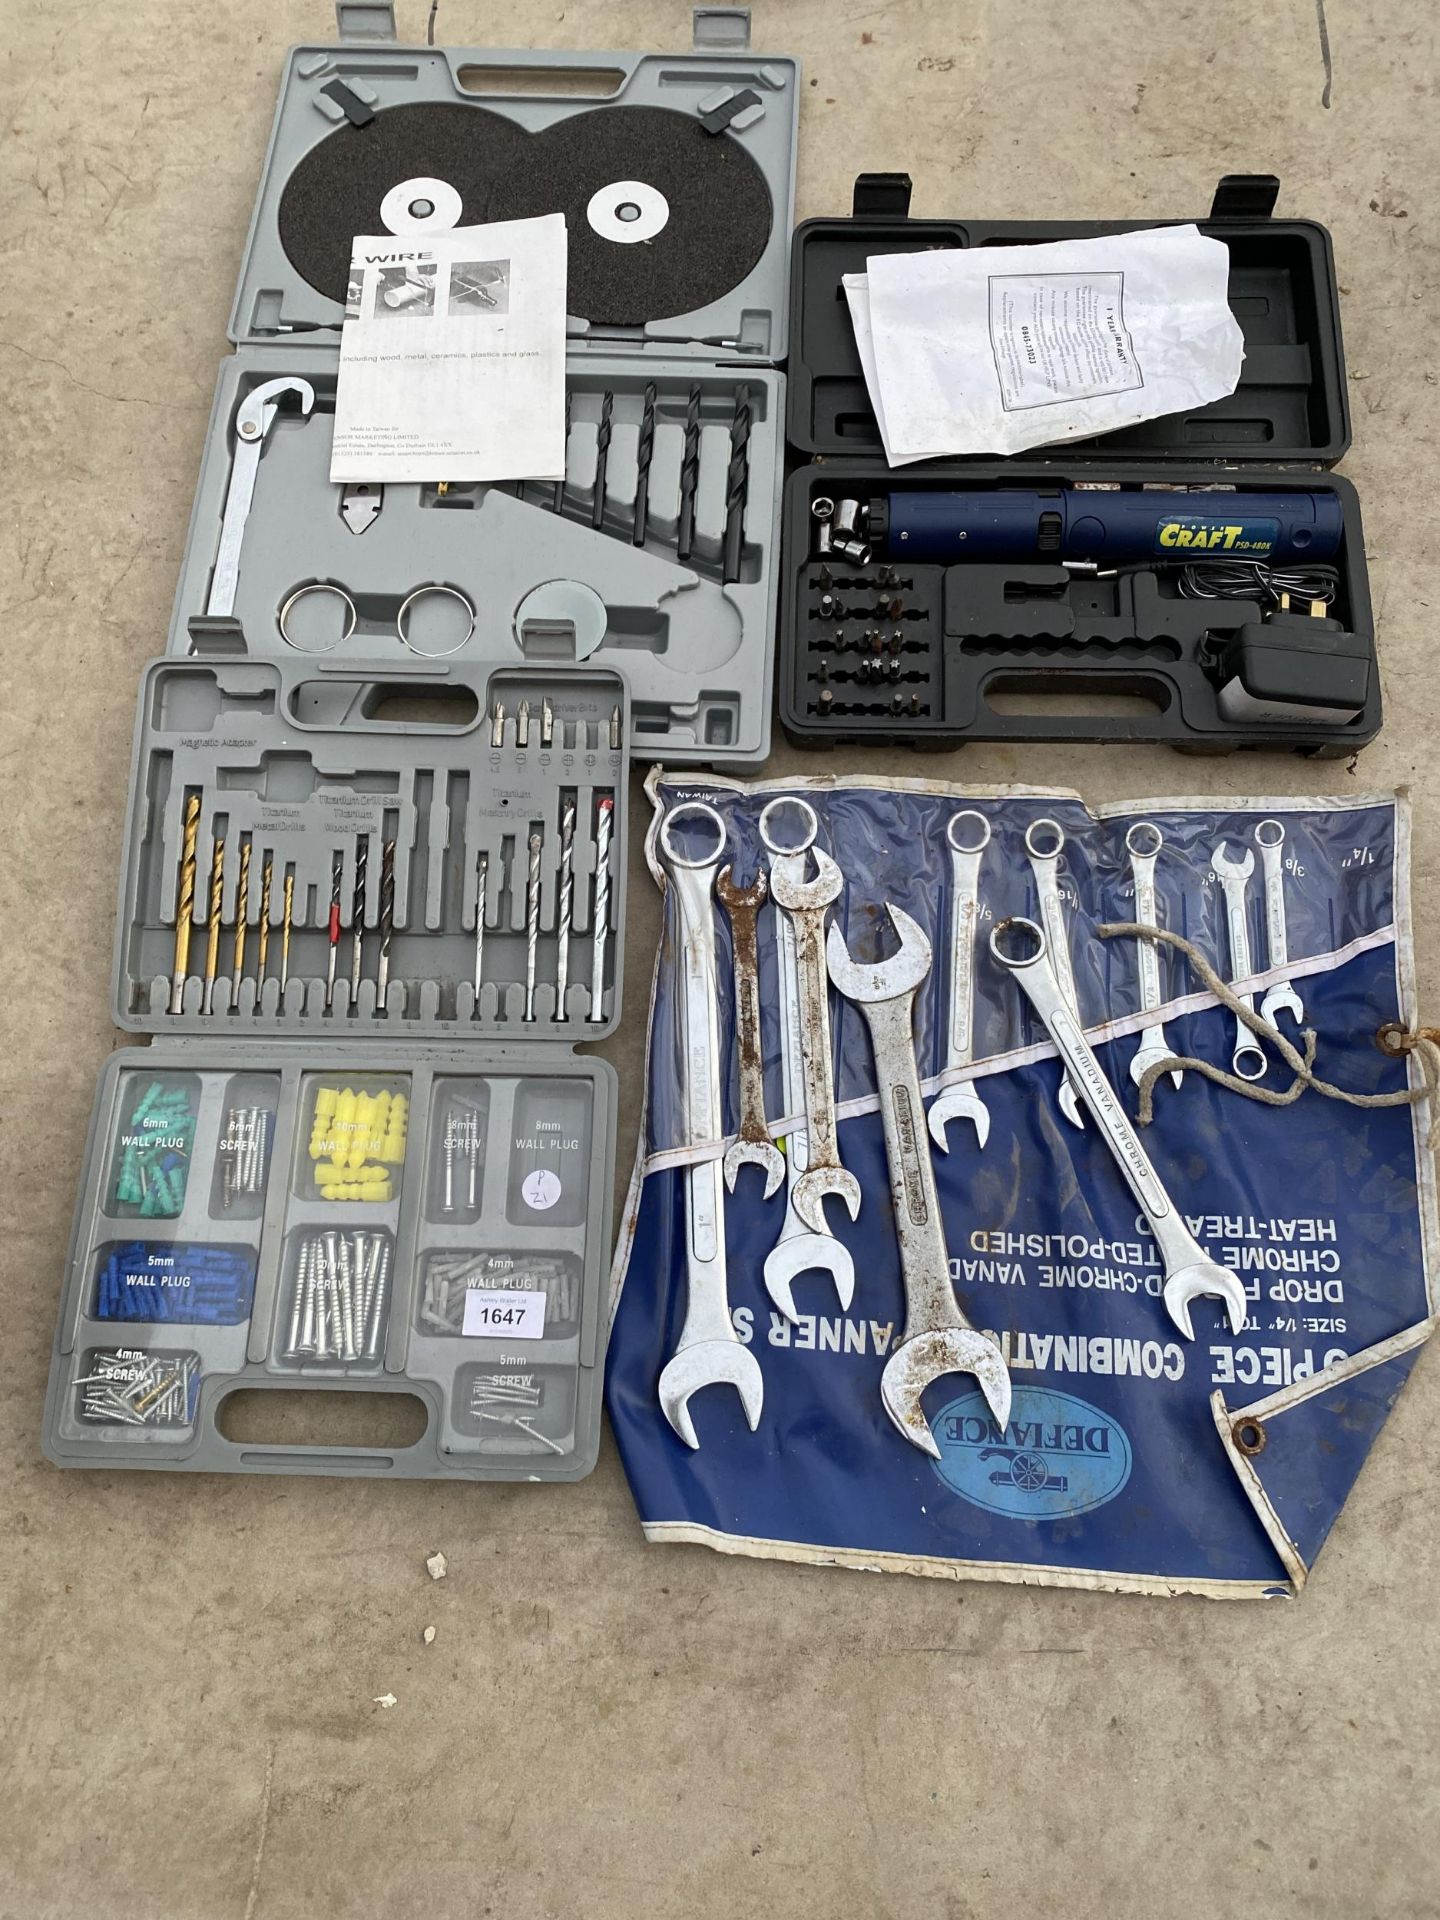 A POWER CRAFT SCREW DRIVER, SPANNER SET AND DRILL BITS ETC